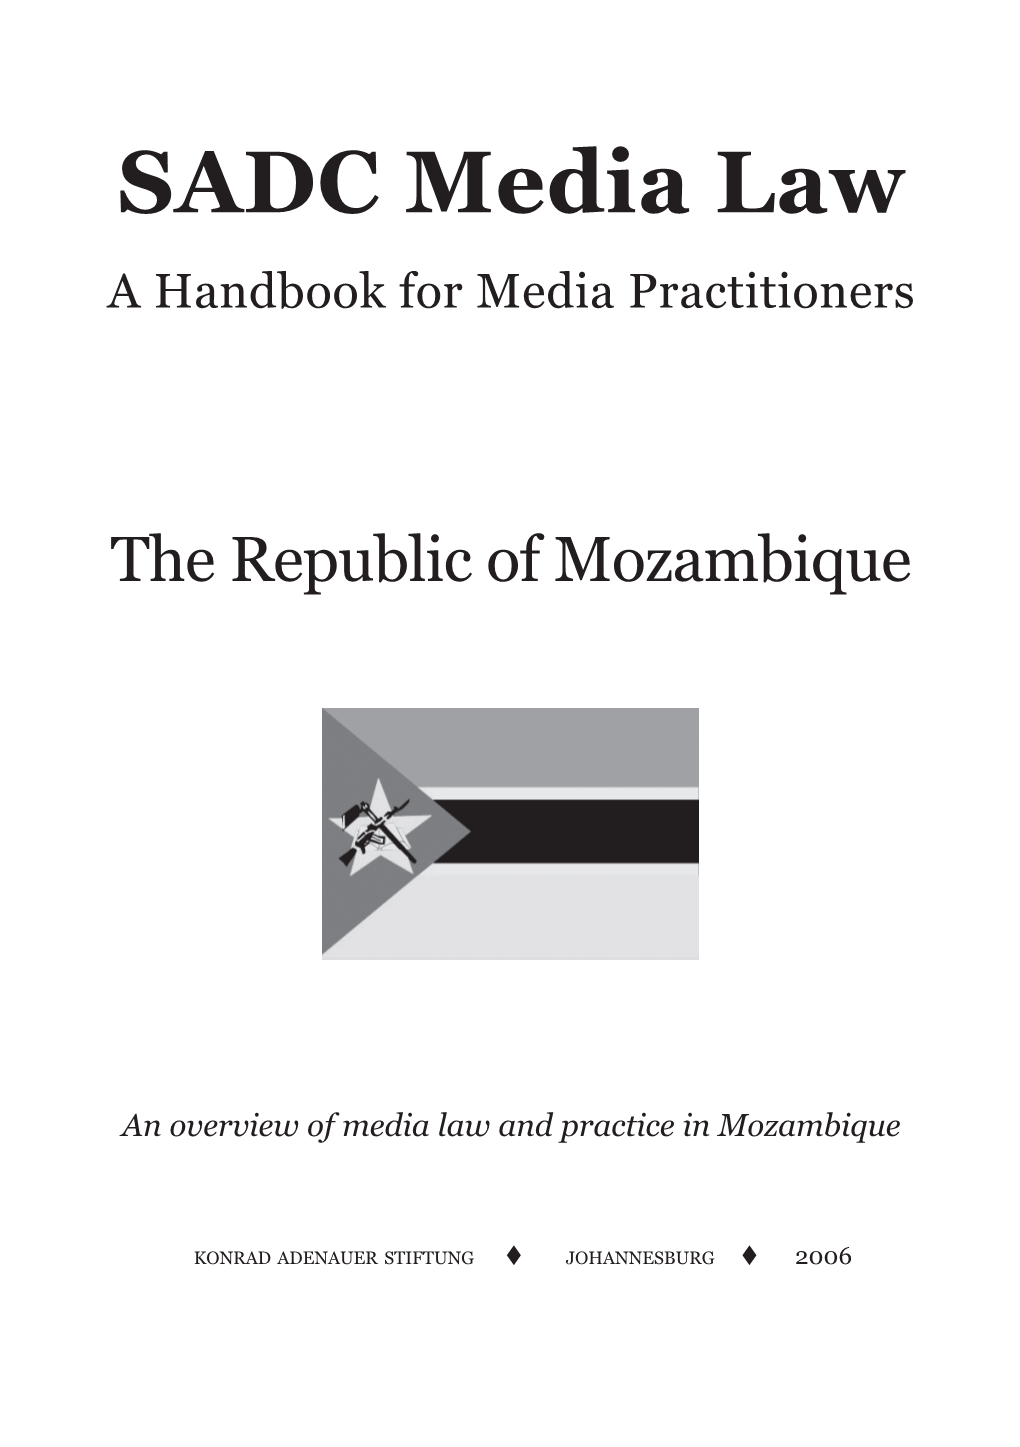 SADC Media Law a Handbook for Media Practitioners